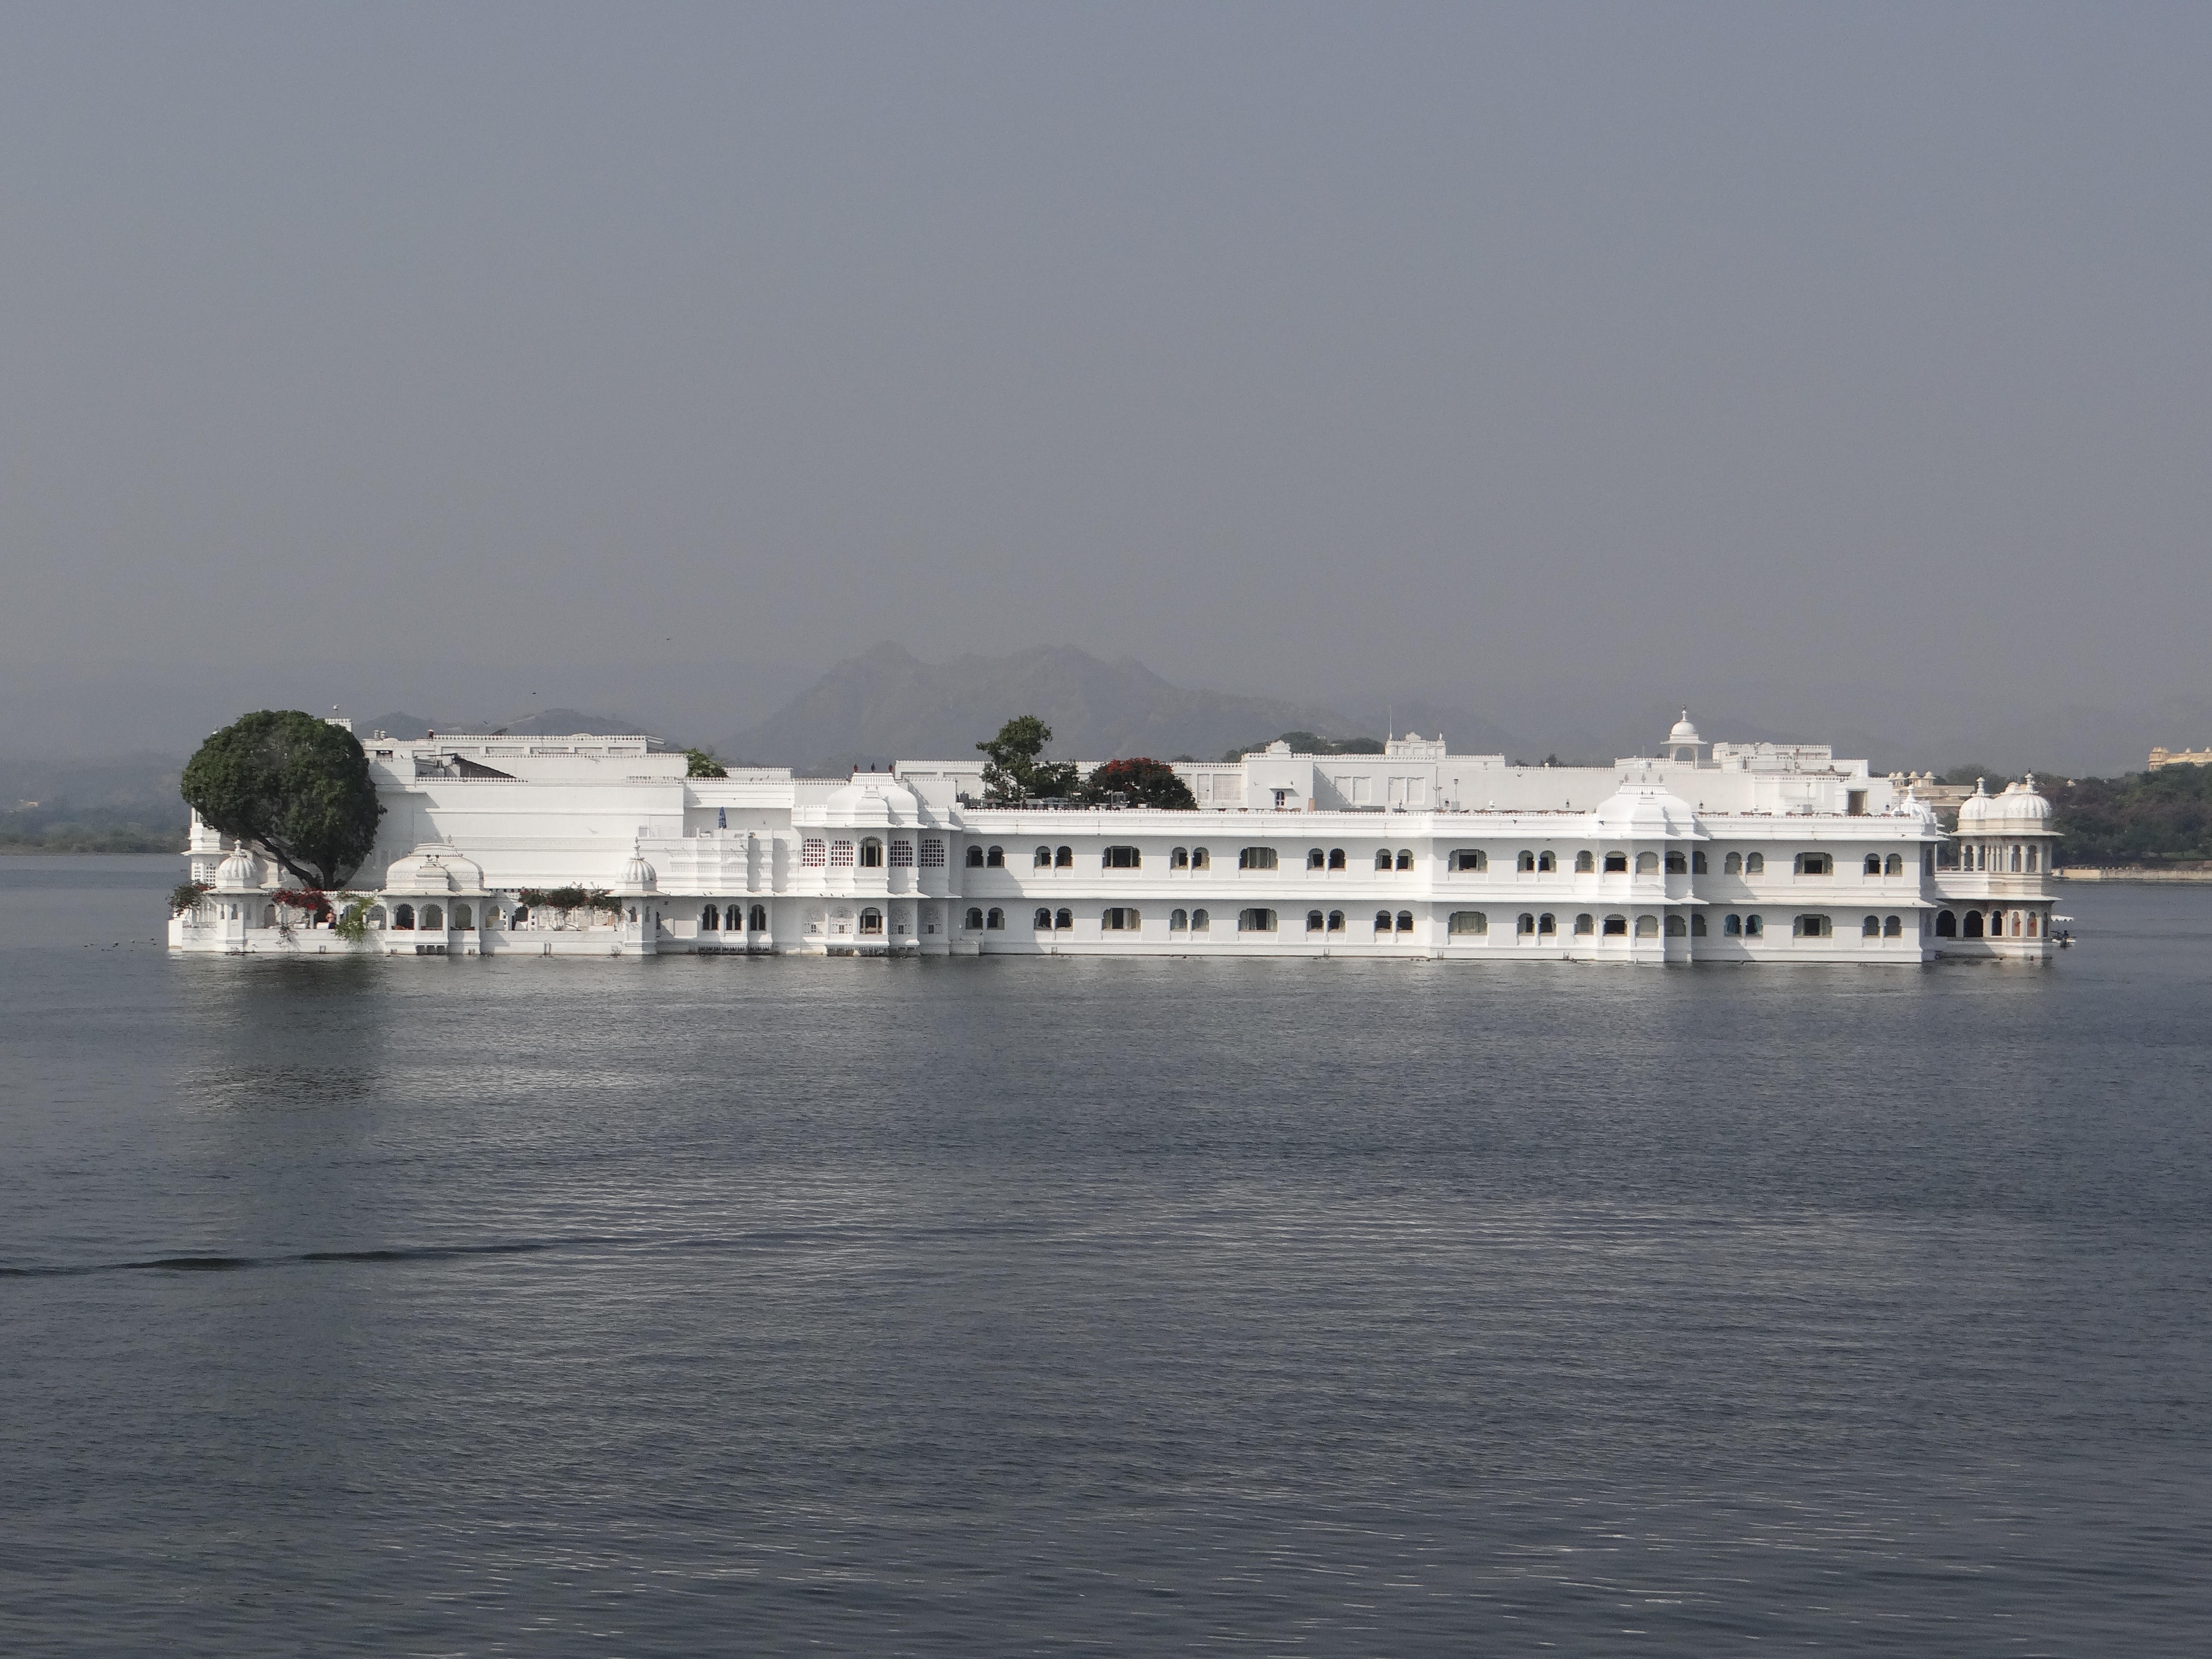 The famous Lake Palace of Udaipur